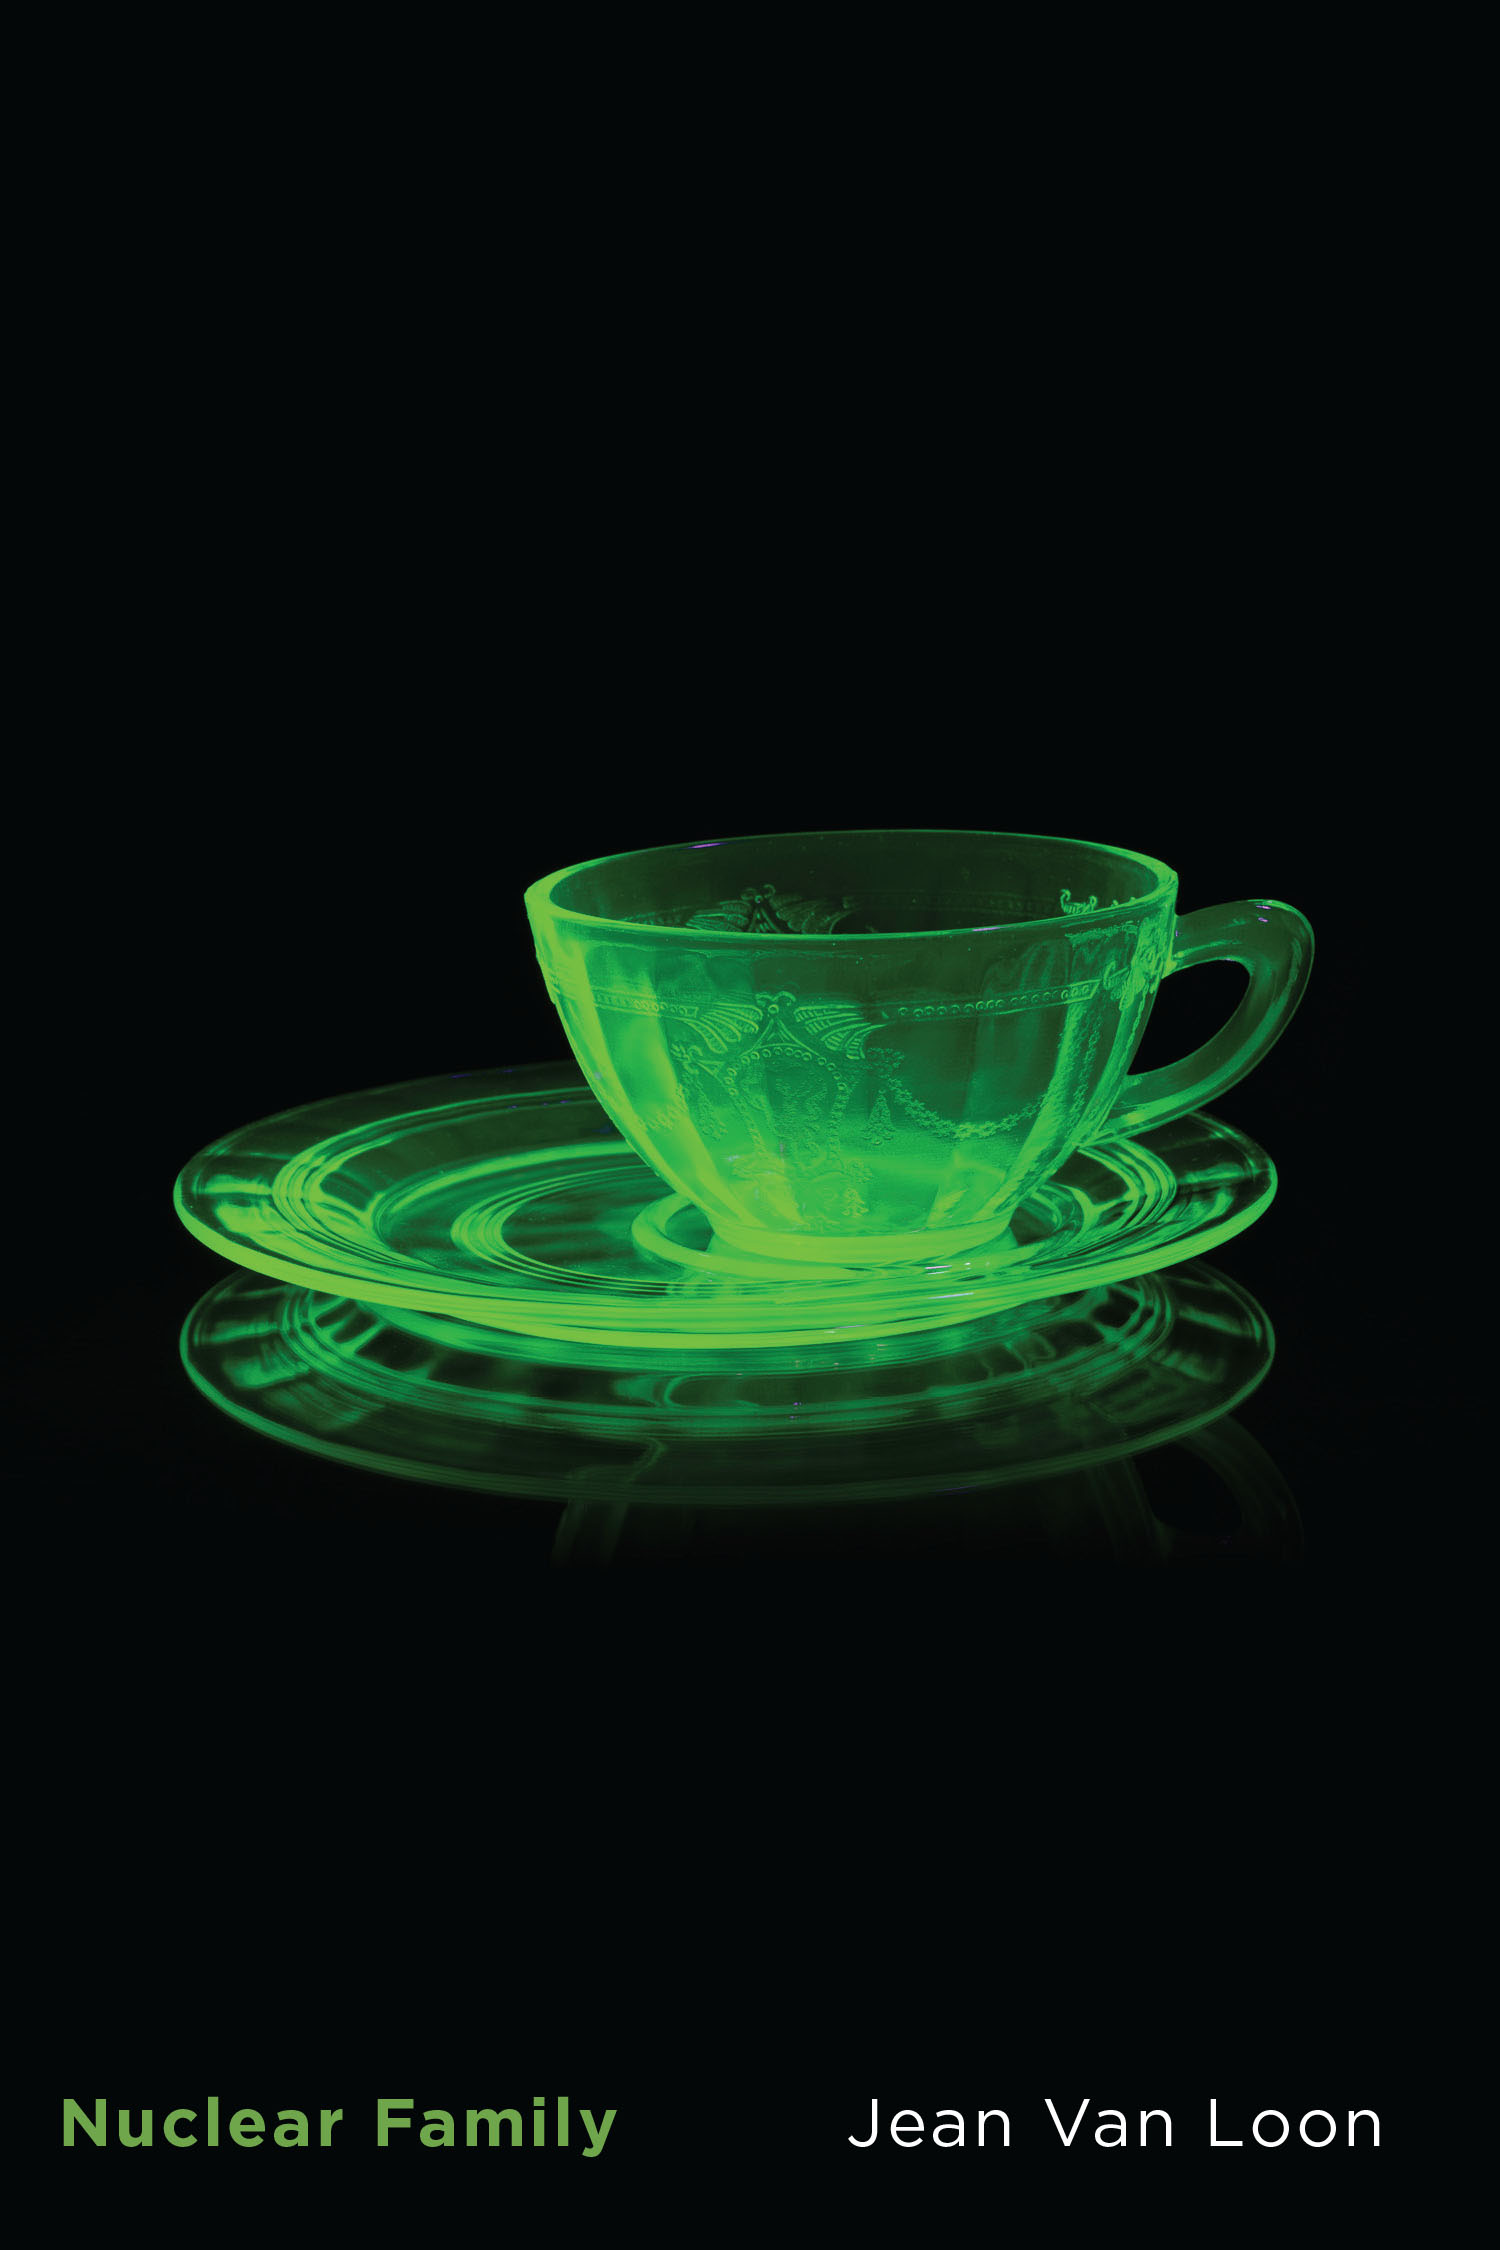 A green uranium-glass cup tilting off-centre on its saucer radiates against an ominous black background.